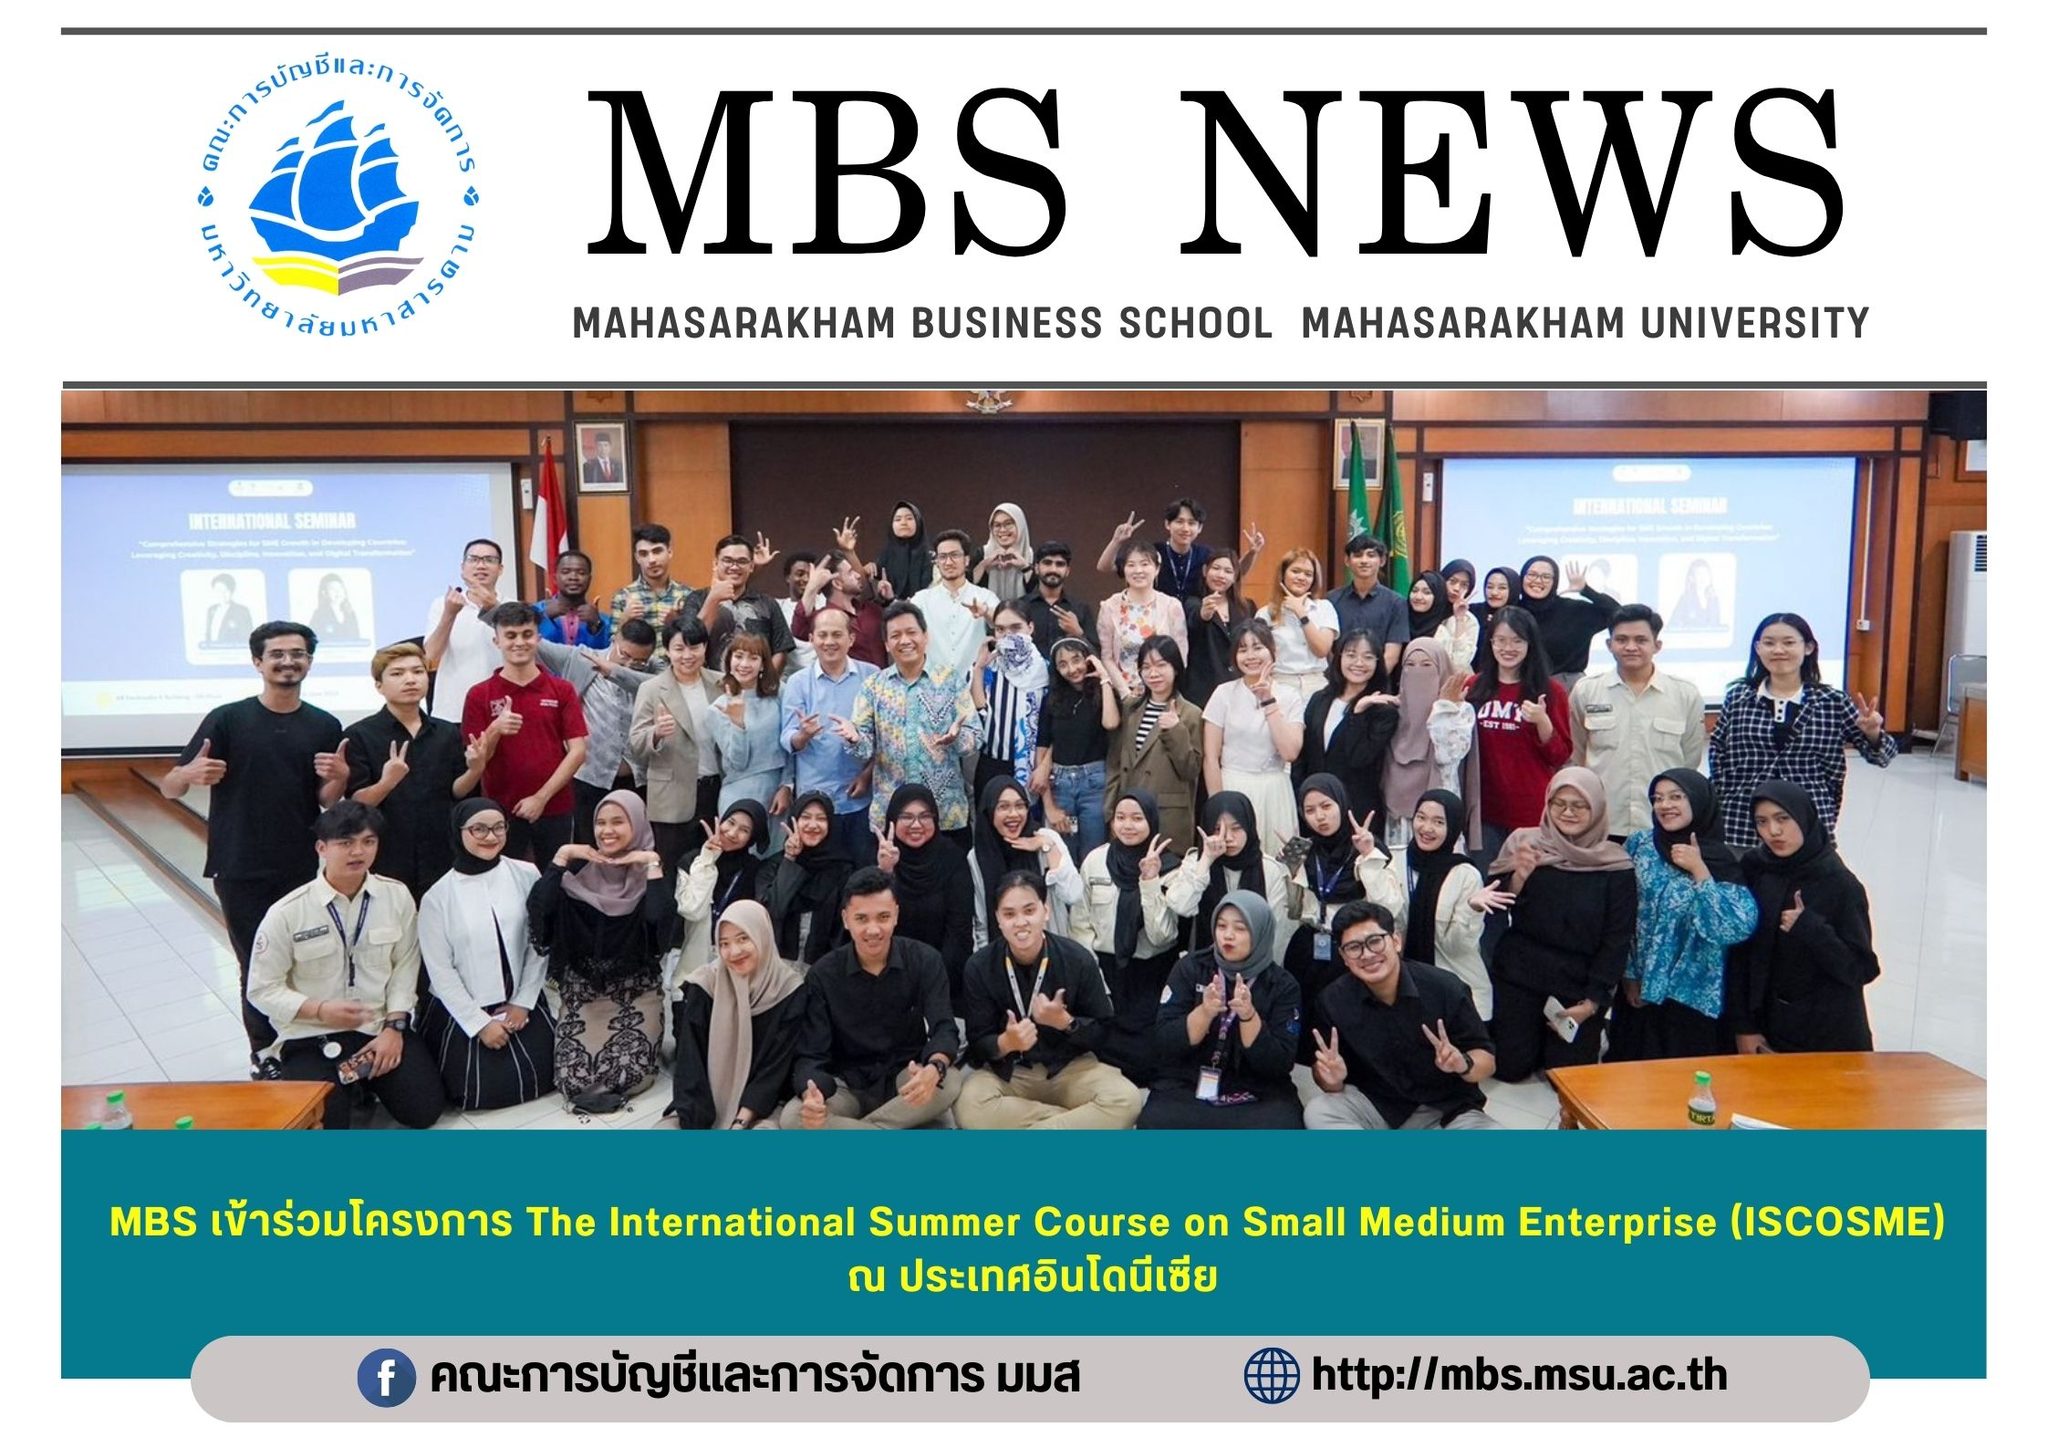 MBS participates in The International Summer Course on Small Medium Enterprise (ISCOSME) in Indonesia.